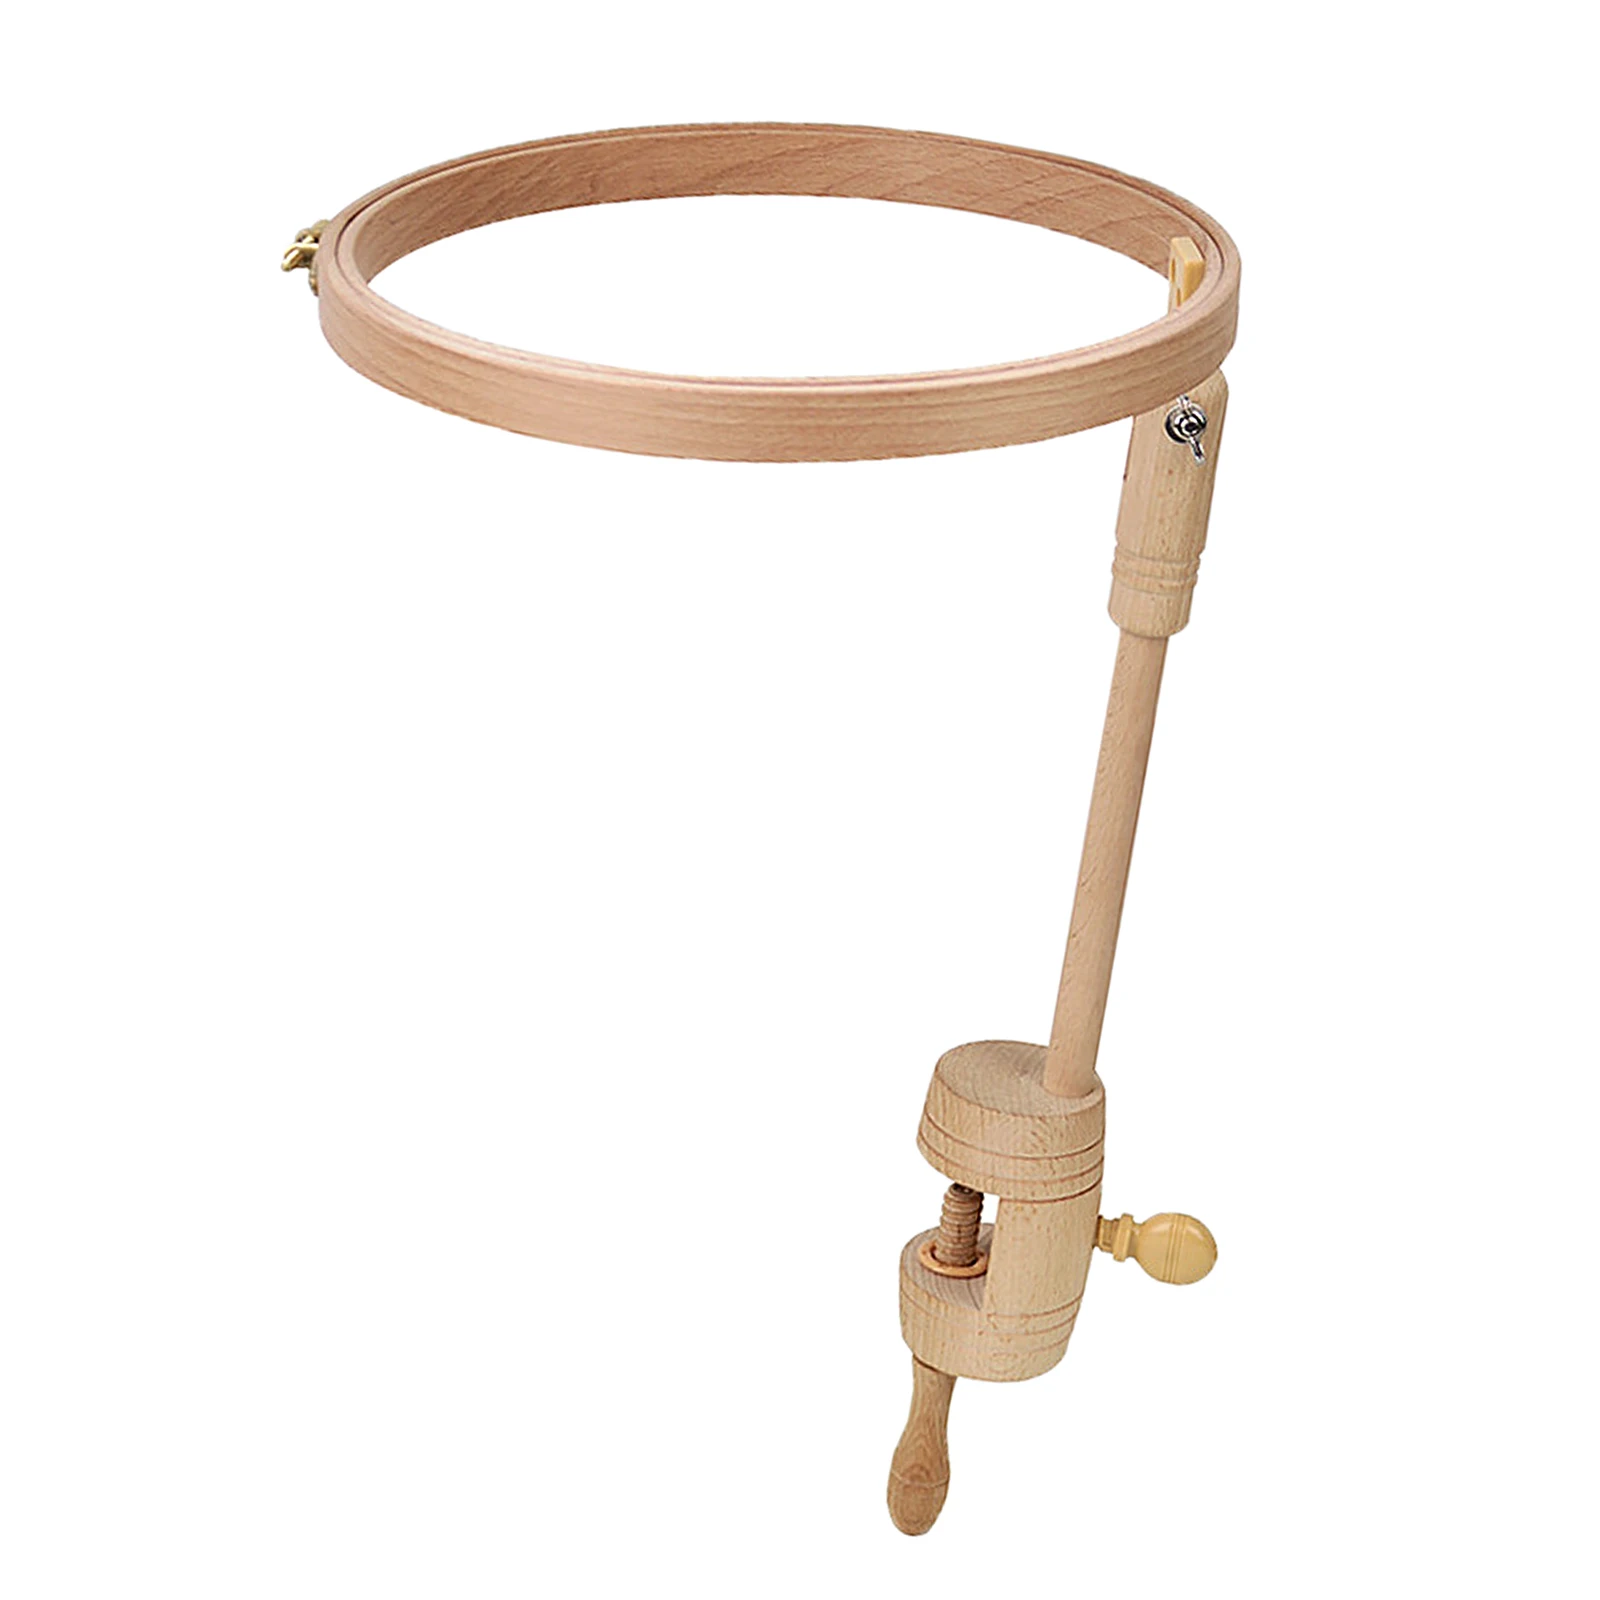 Embroidery Stand Natural Beech Wooden Adjustable Cross Stitch Lap Hoop Holder for Gift